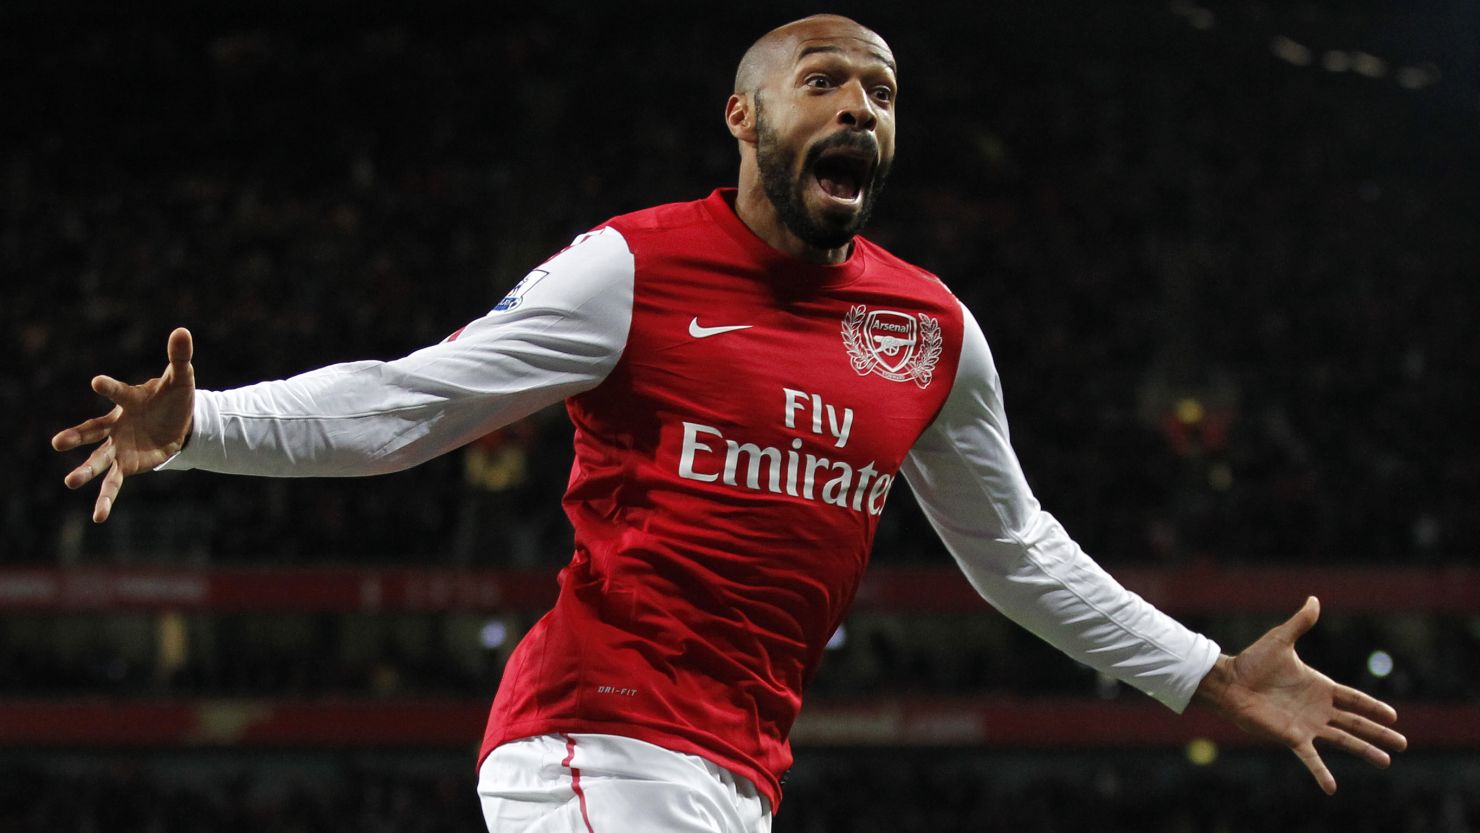 French striker Thierry Henry celebrates after scoring the winner against Leeds on his return to Arsenal.